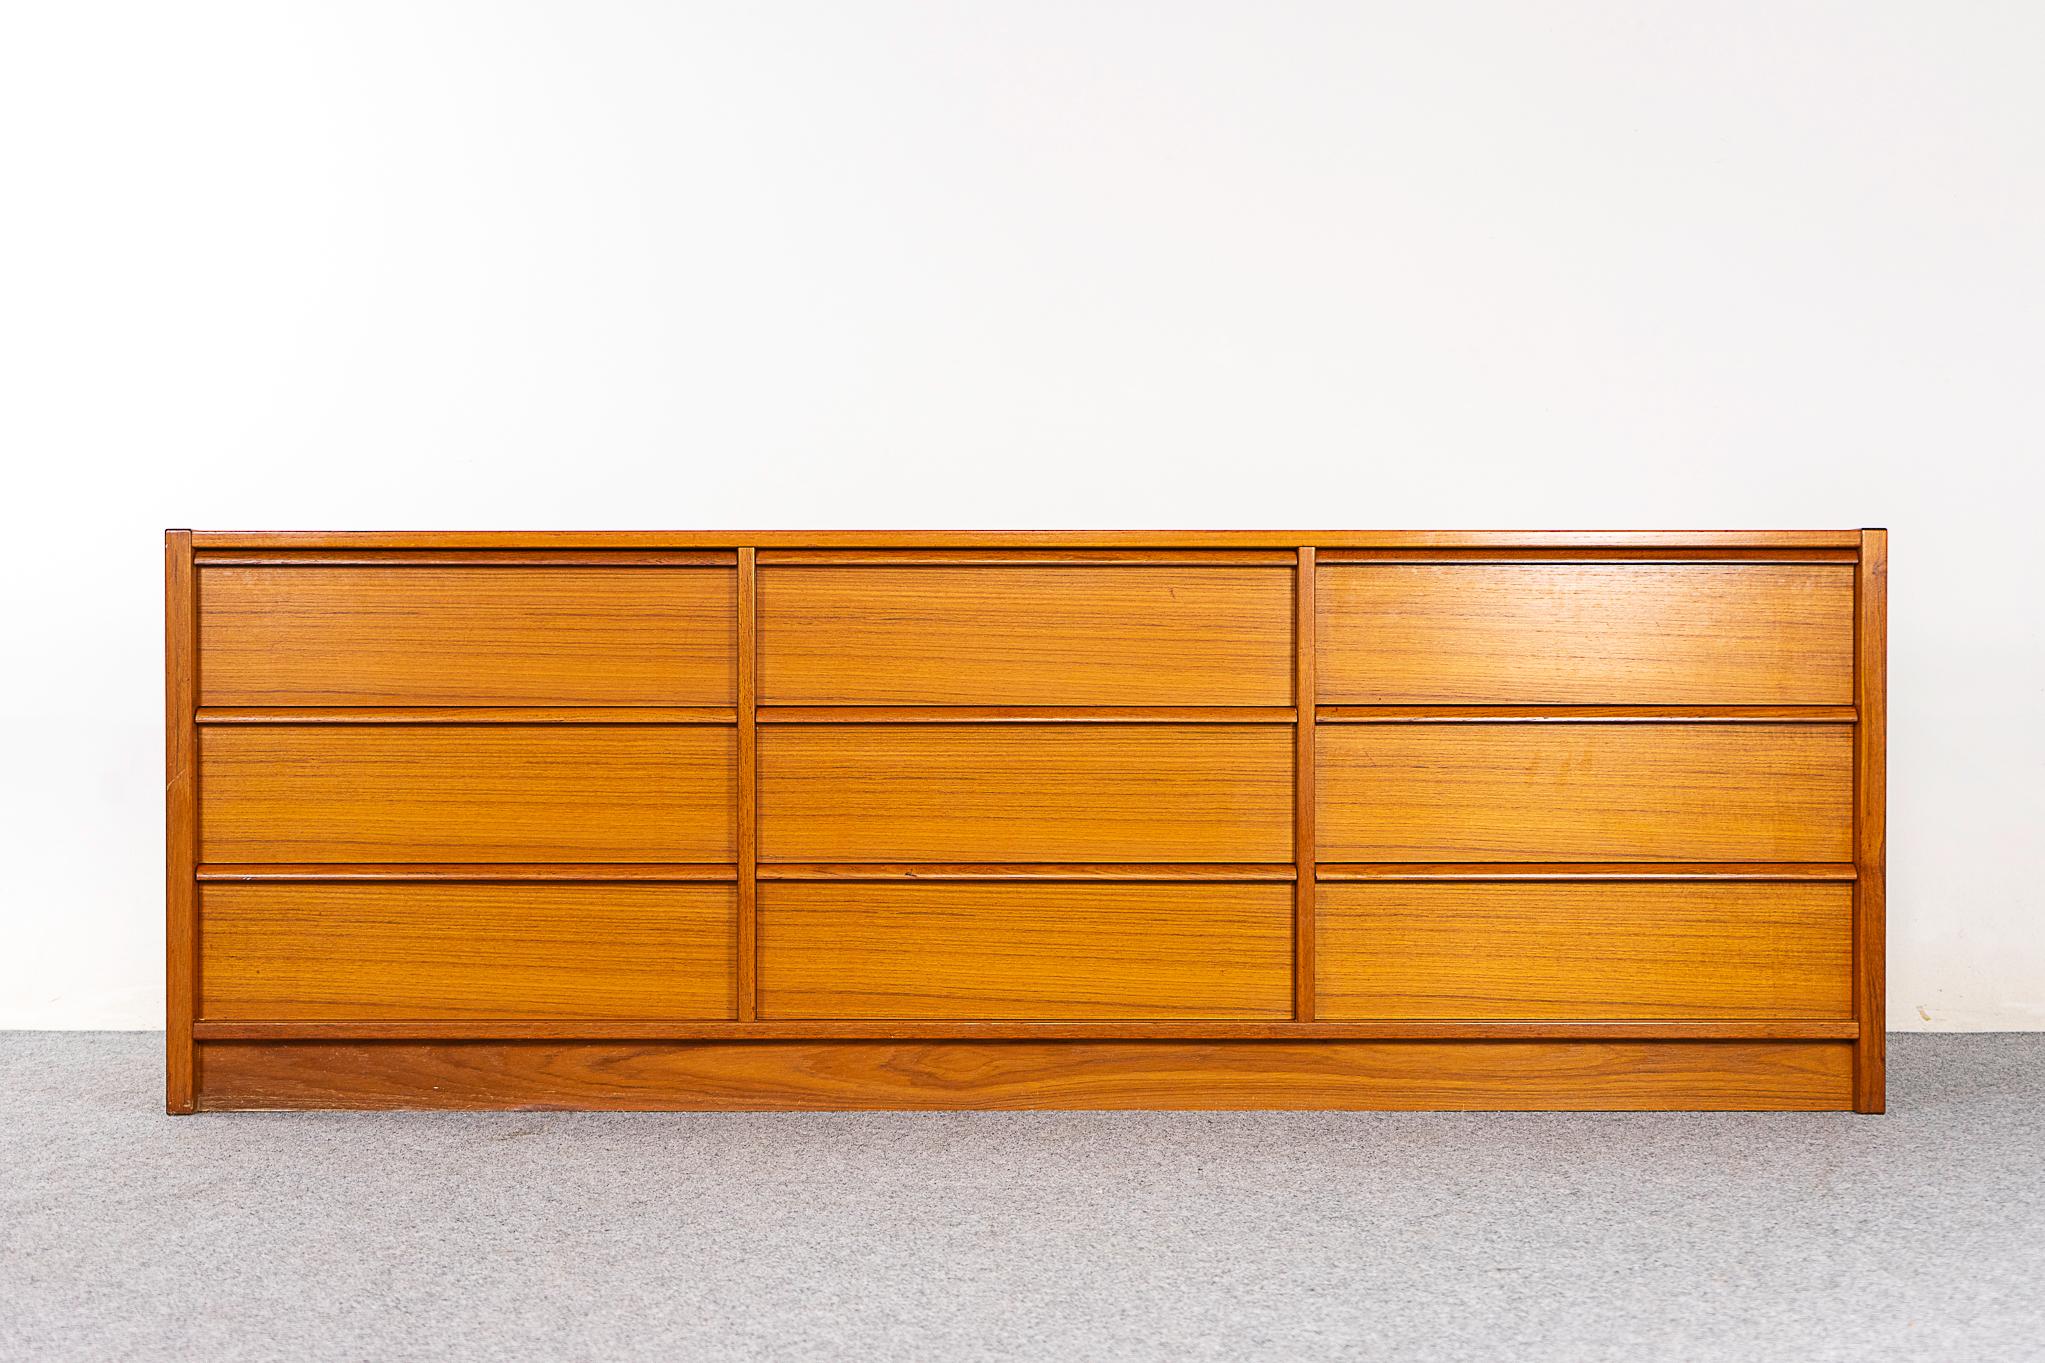 Teak dresser by Jesper International, circa 1970's. Robust construction with beautiful veneer top and drawer faces. Dovetail construction with integrated, horizontal sleek drawer pulls. Very nice as-is condition!

Unrestored item with option to